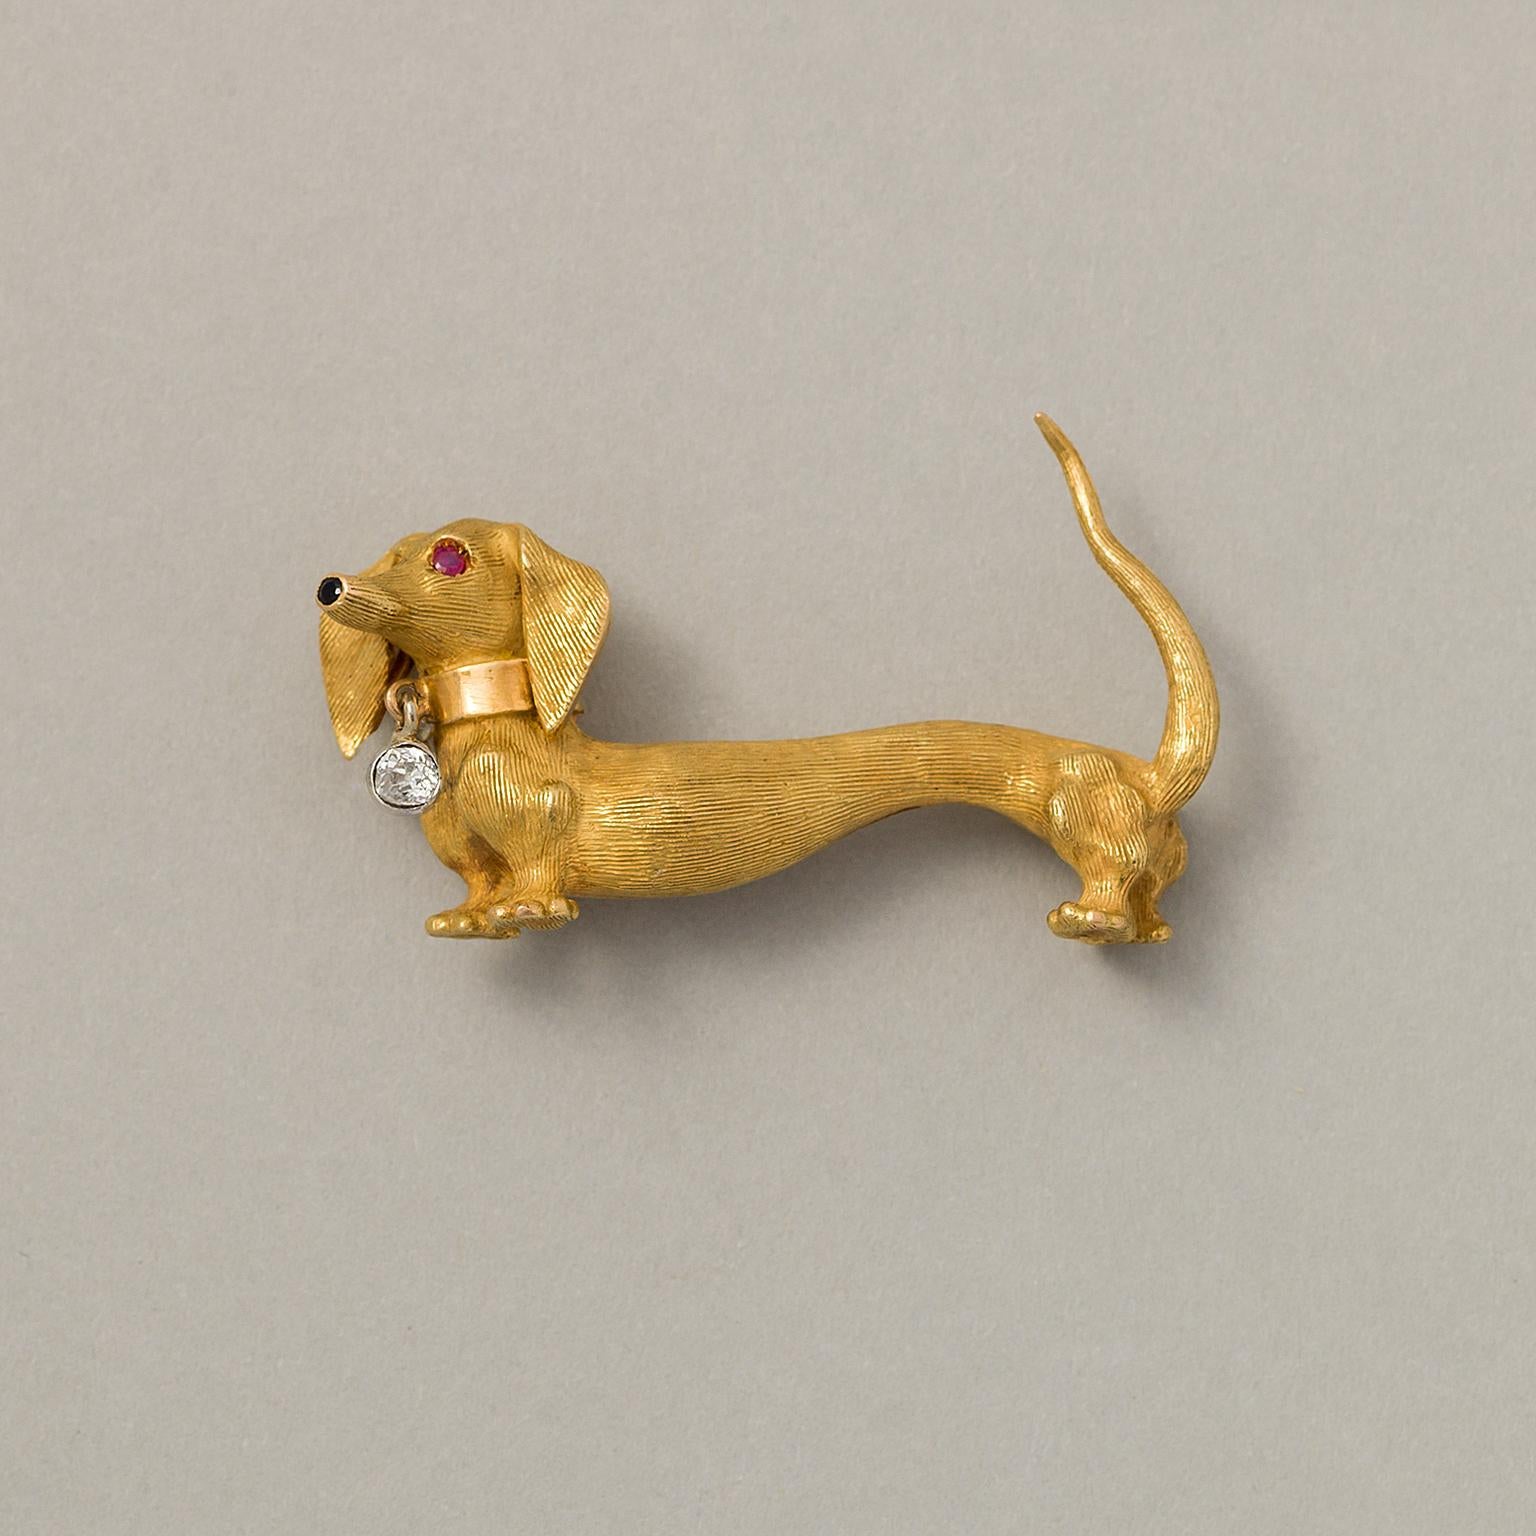 An 18 carat gold happy little Dachshund brooch with a matte striped fur and a polished collar with a dangling old cut diamond set in white gold with an onyx nose and ruby eyes, French, circa 1960.

weight: 14.78 grams
dimensions: 4.4 x 2.5 cm